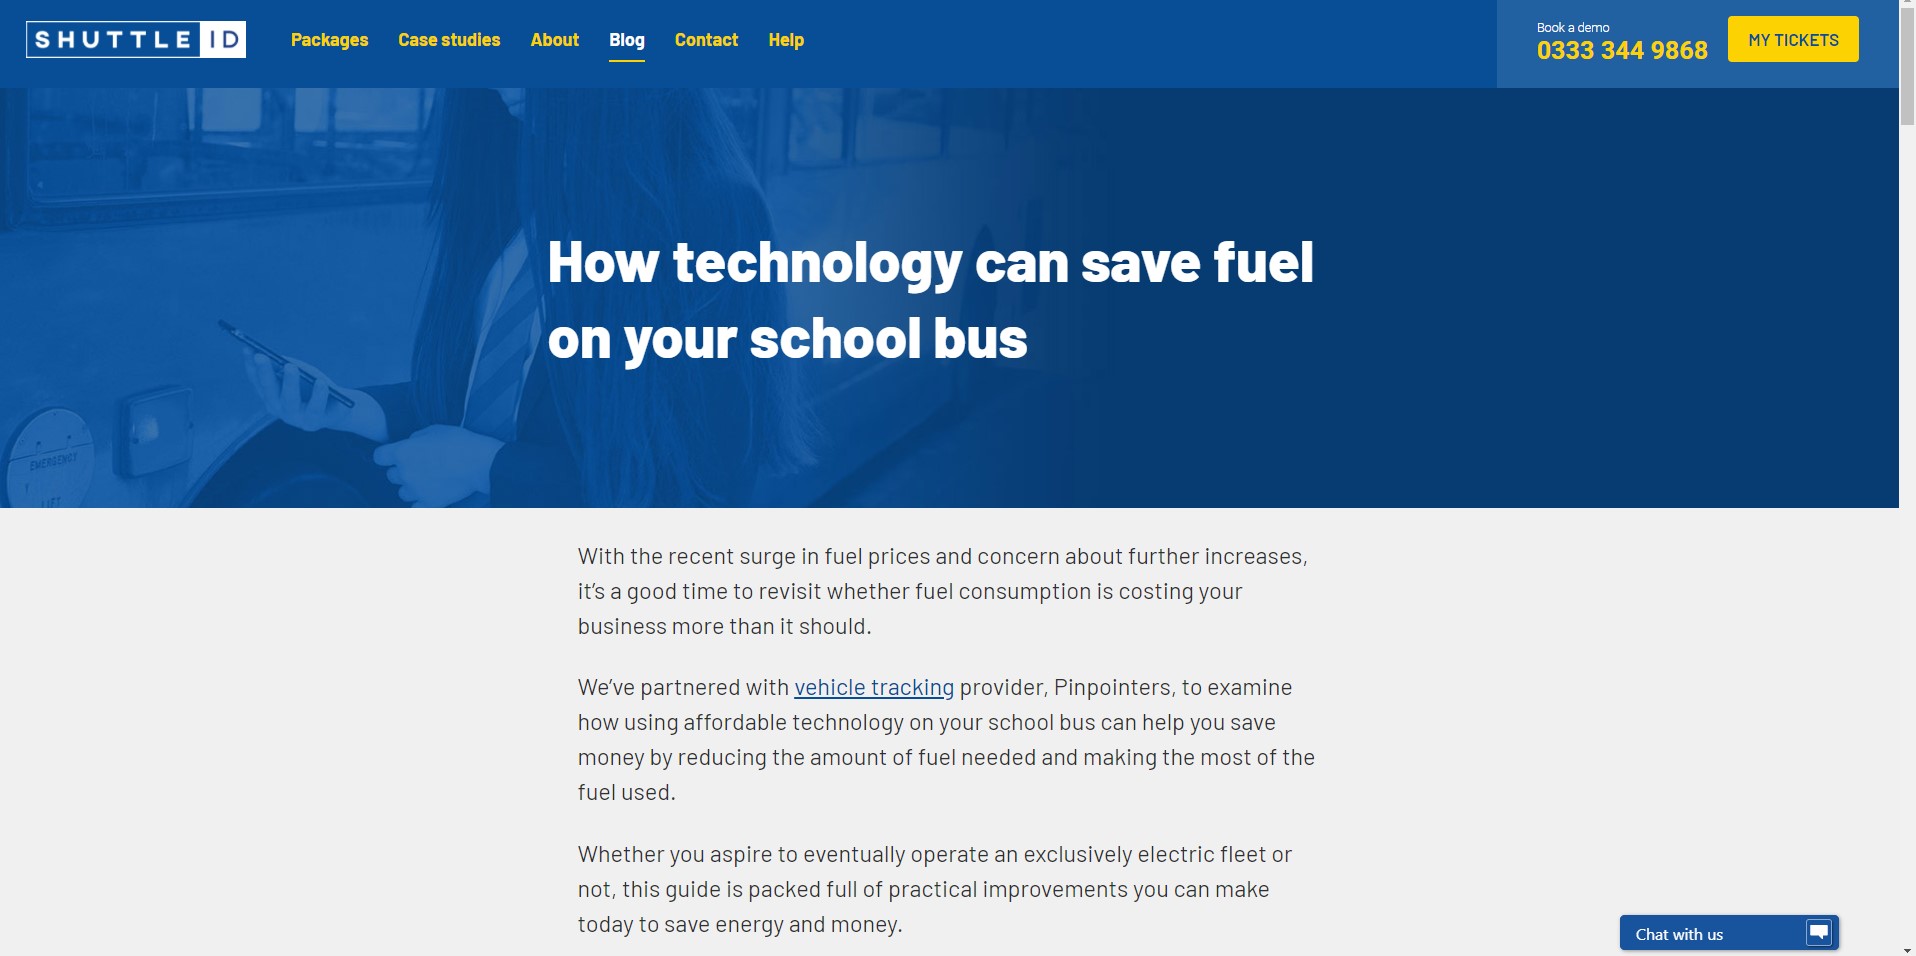 ShuttleID and Pinpointers release fuel saving guide